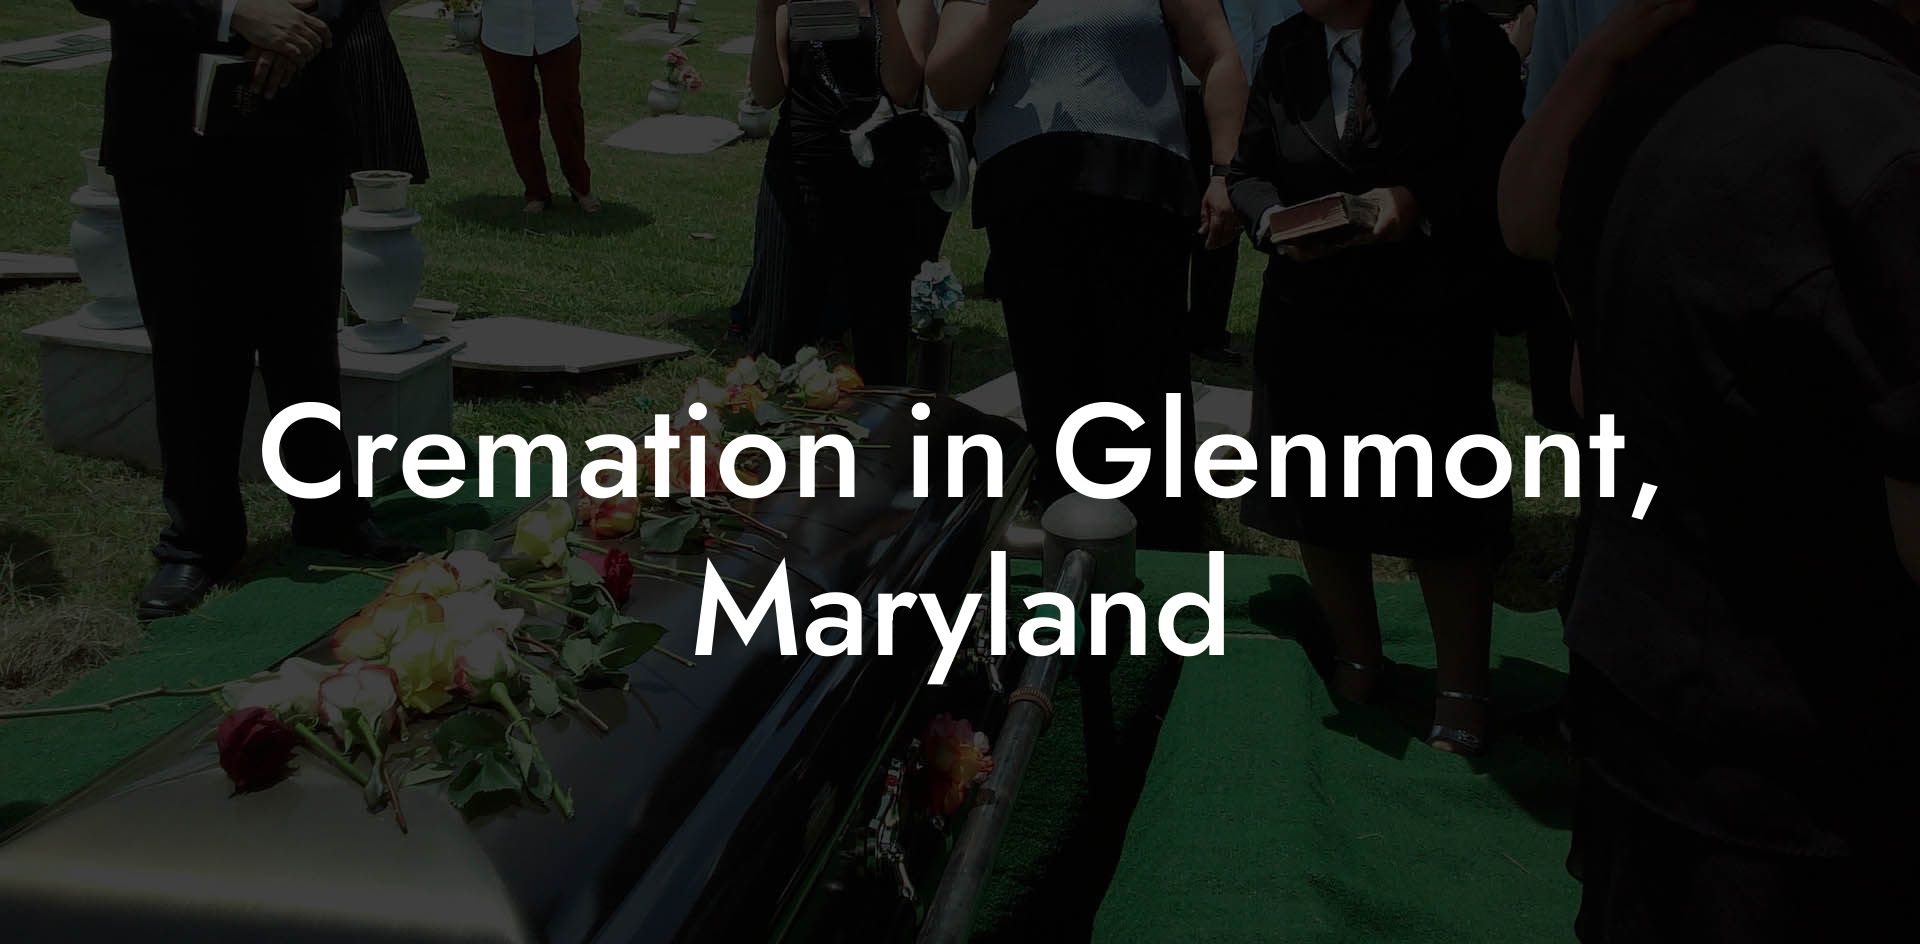 Cremation in Glenmont, Maryland